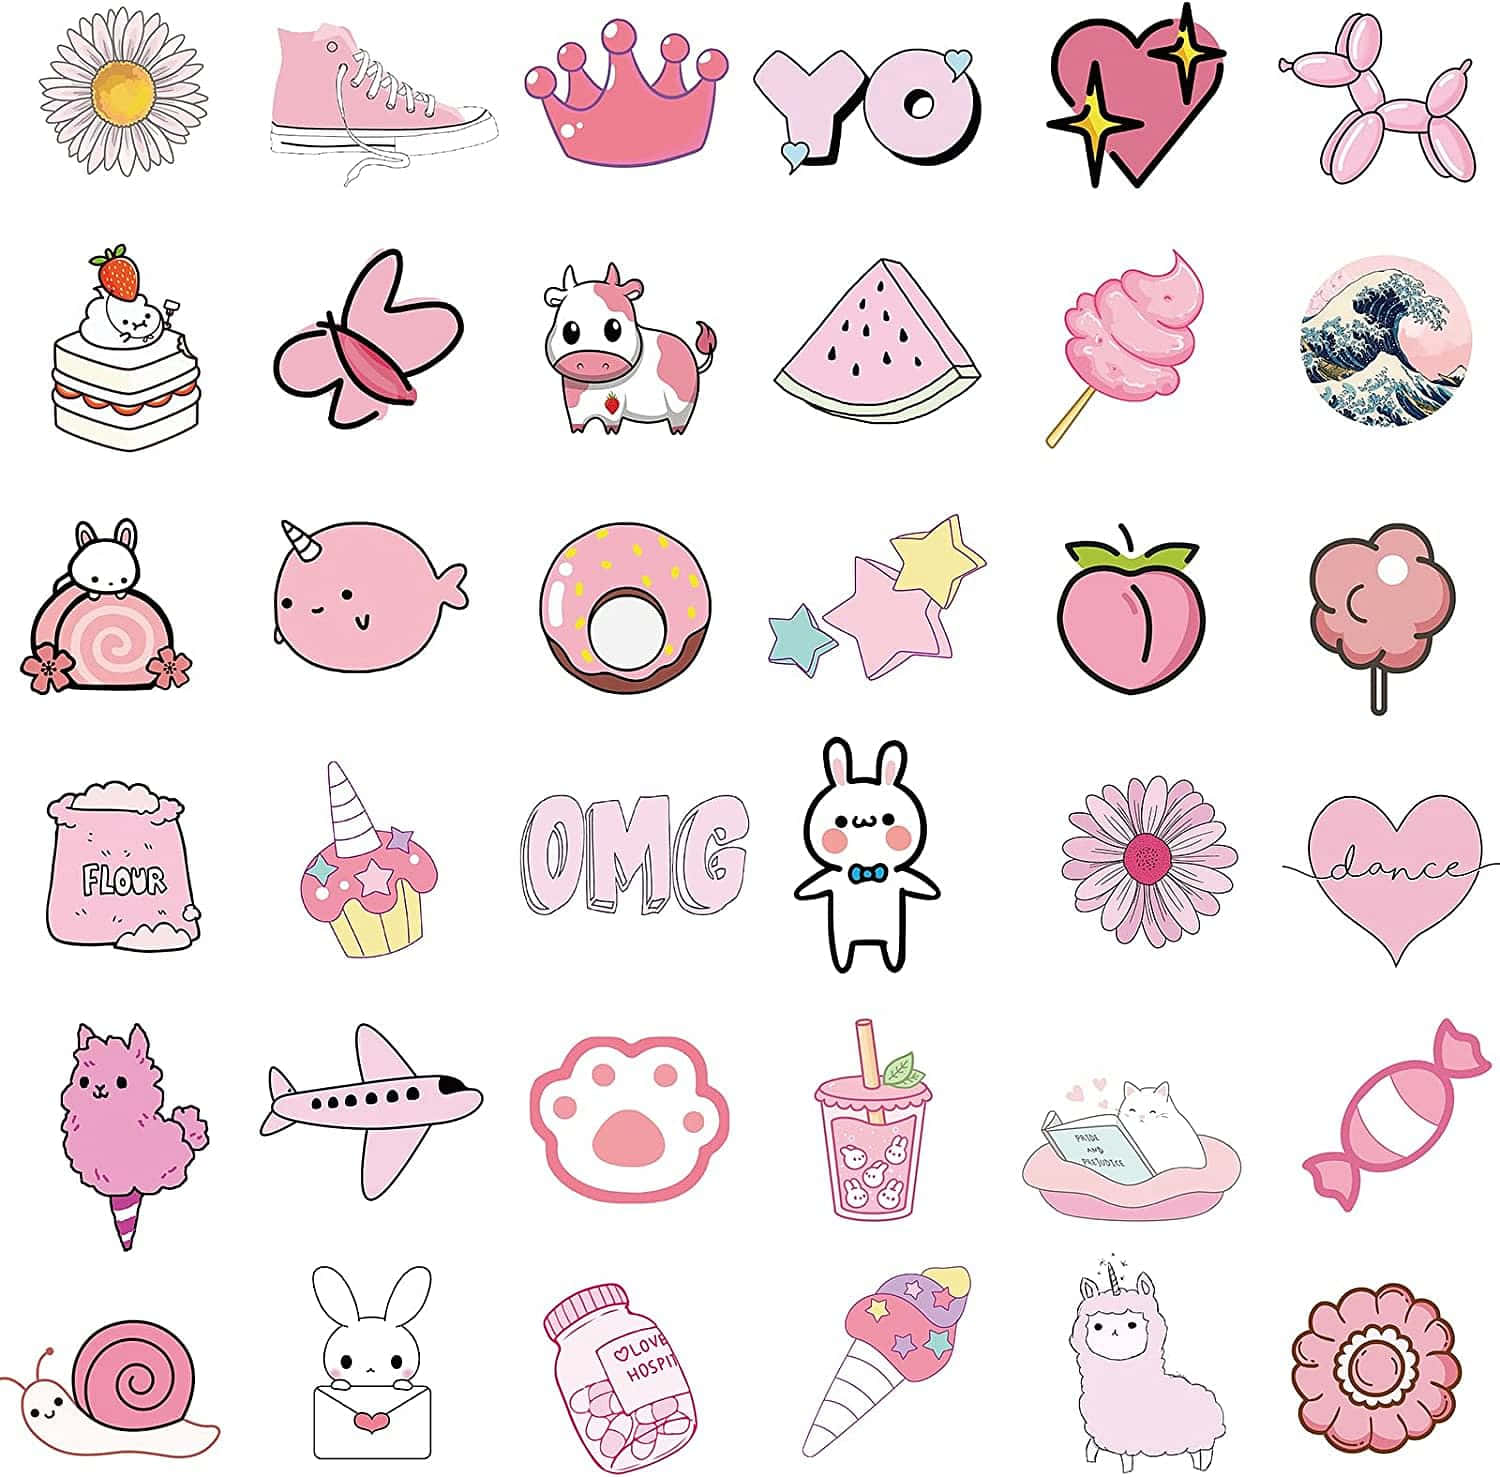 Pink Aesthetic Images  Free Photos, PNG Stickers, Wallpapers